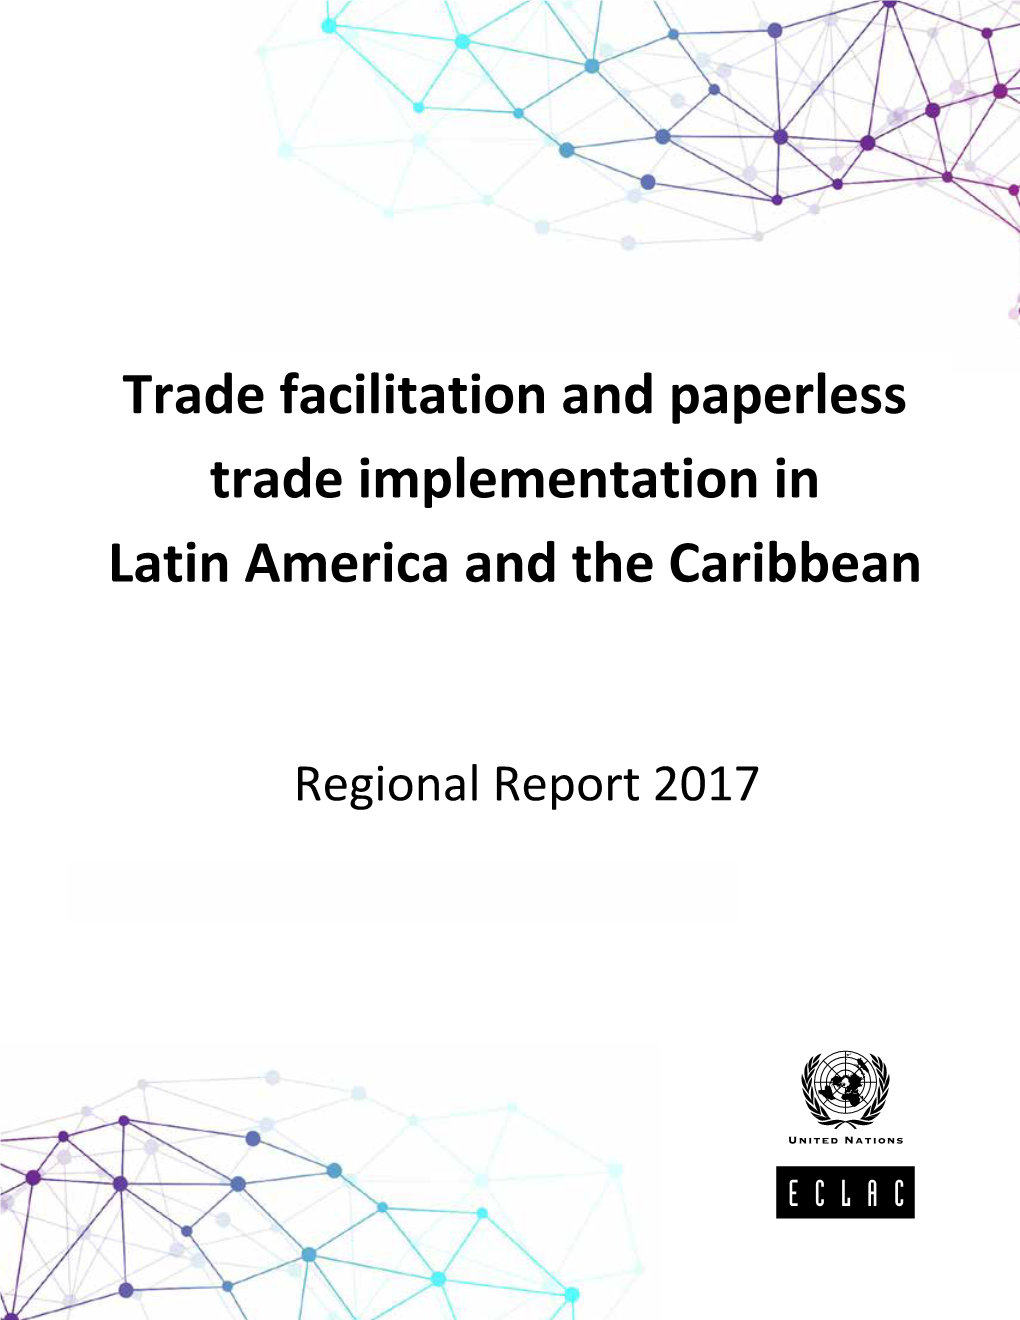 Trade Facilitation and Paperless Trade Implementation in Latin America